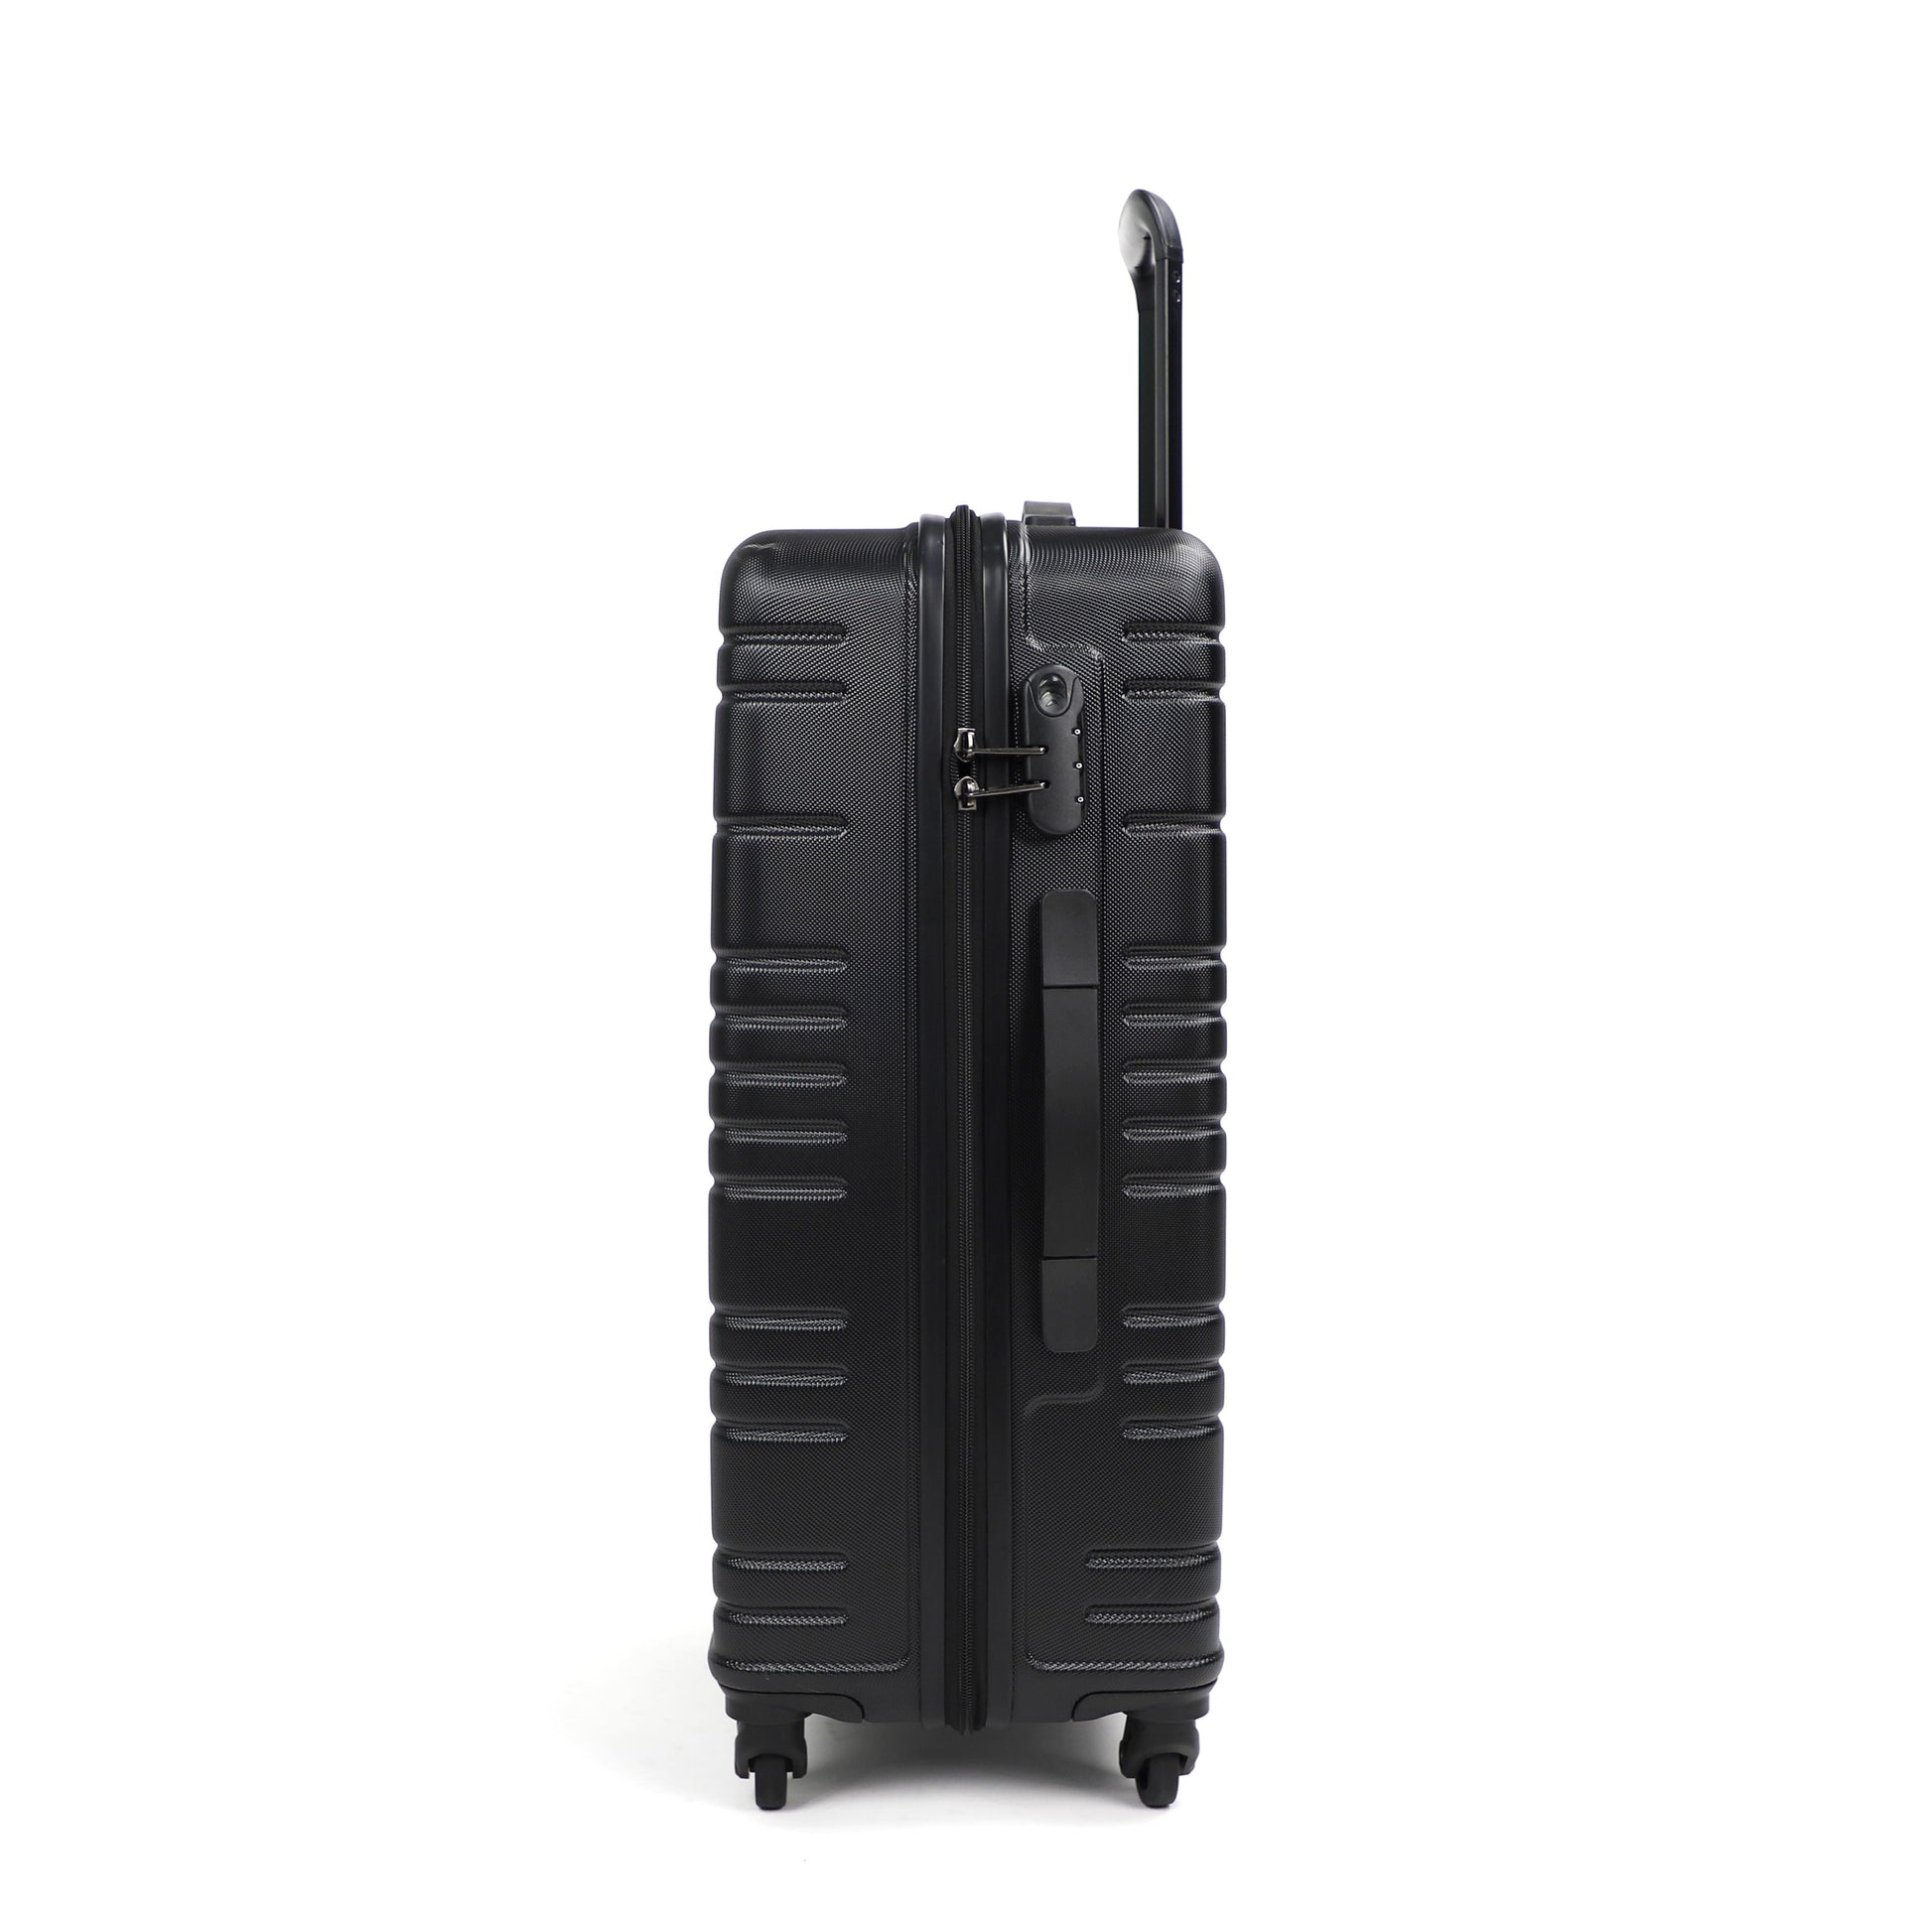 Airline_Luggage_Sets_3pieces_Black_right_view_N12721001